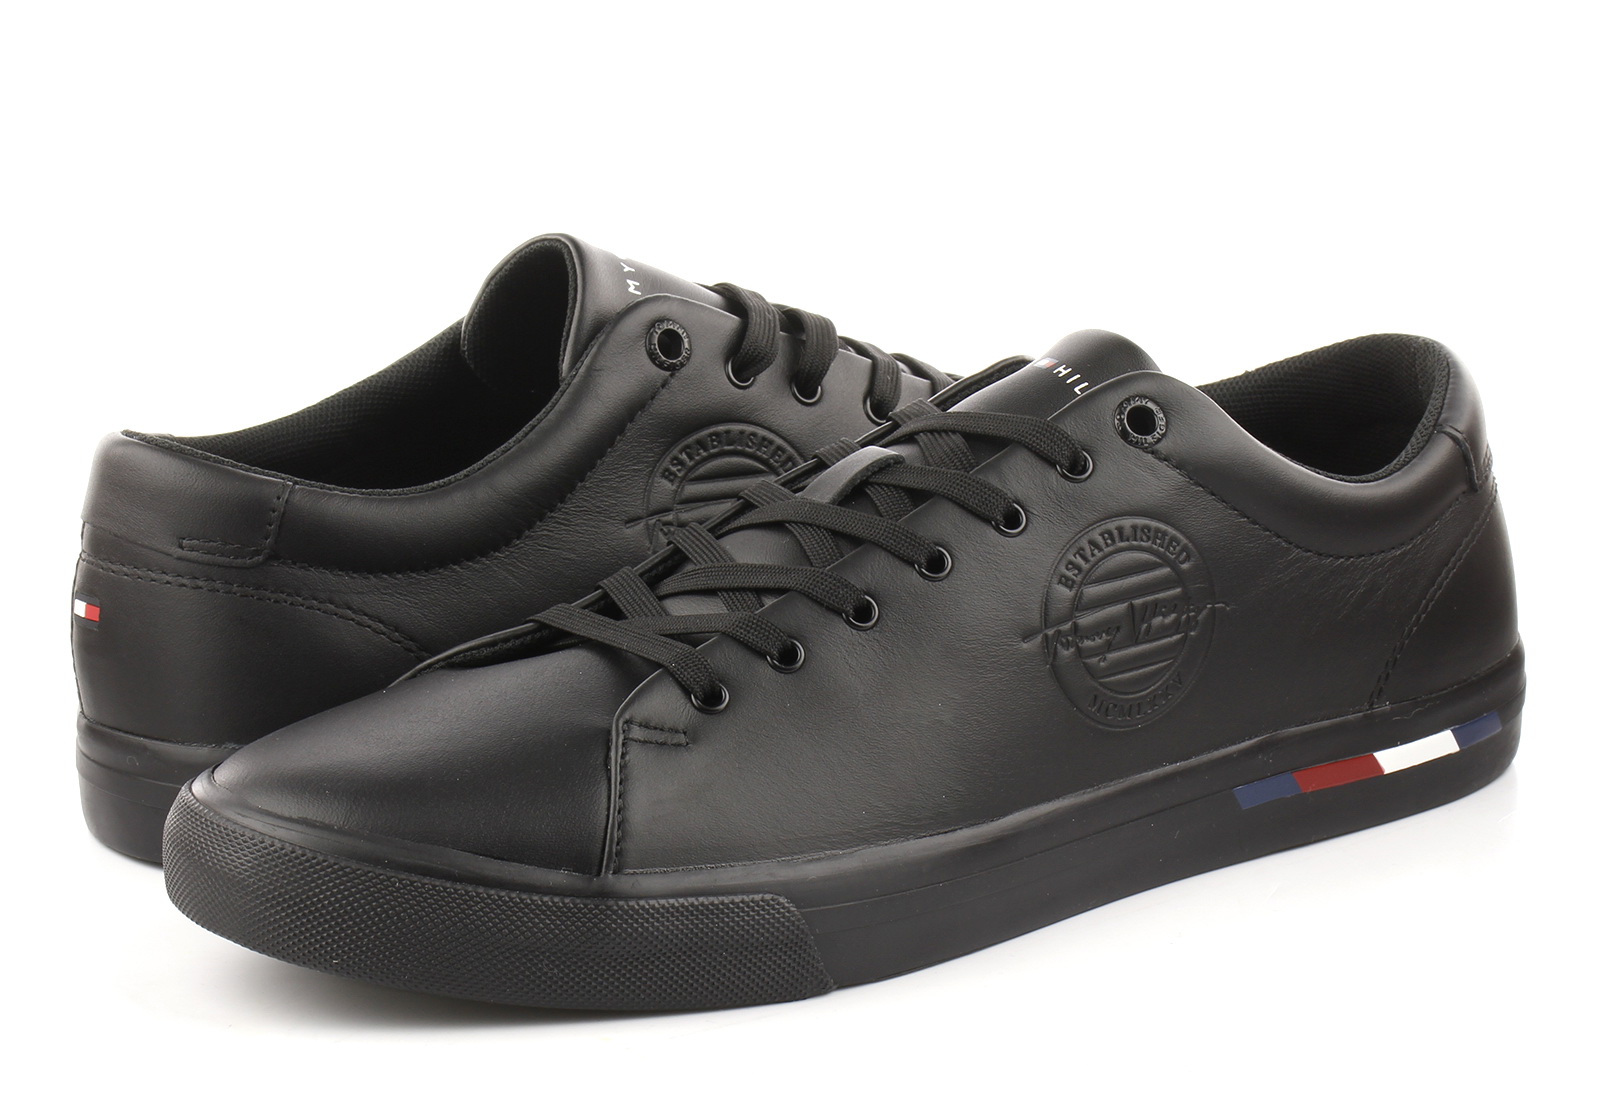 Tommy Hilfiger Sneakers Dino 25a